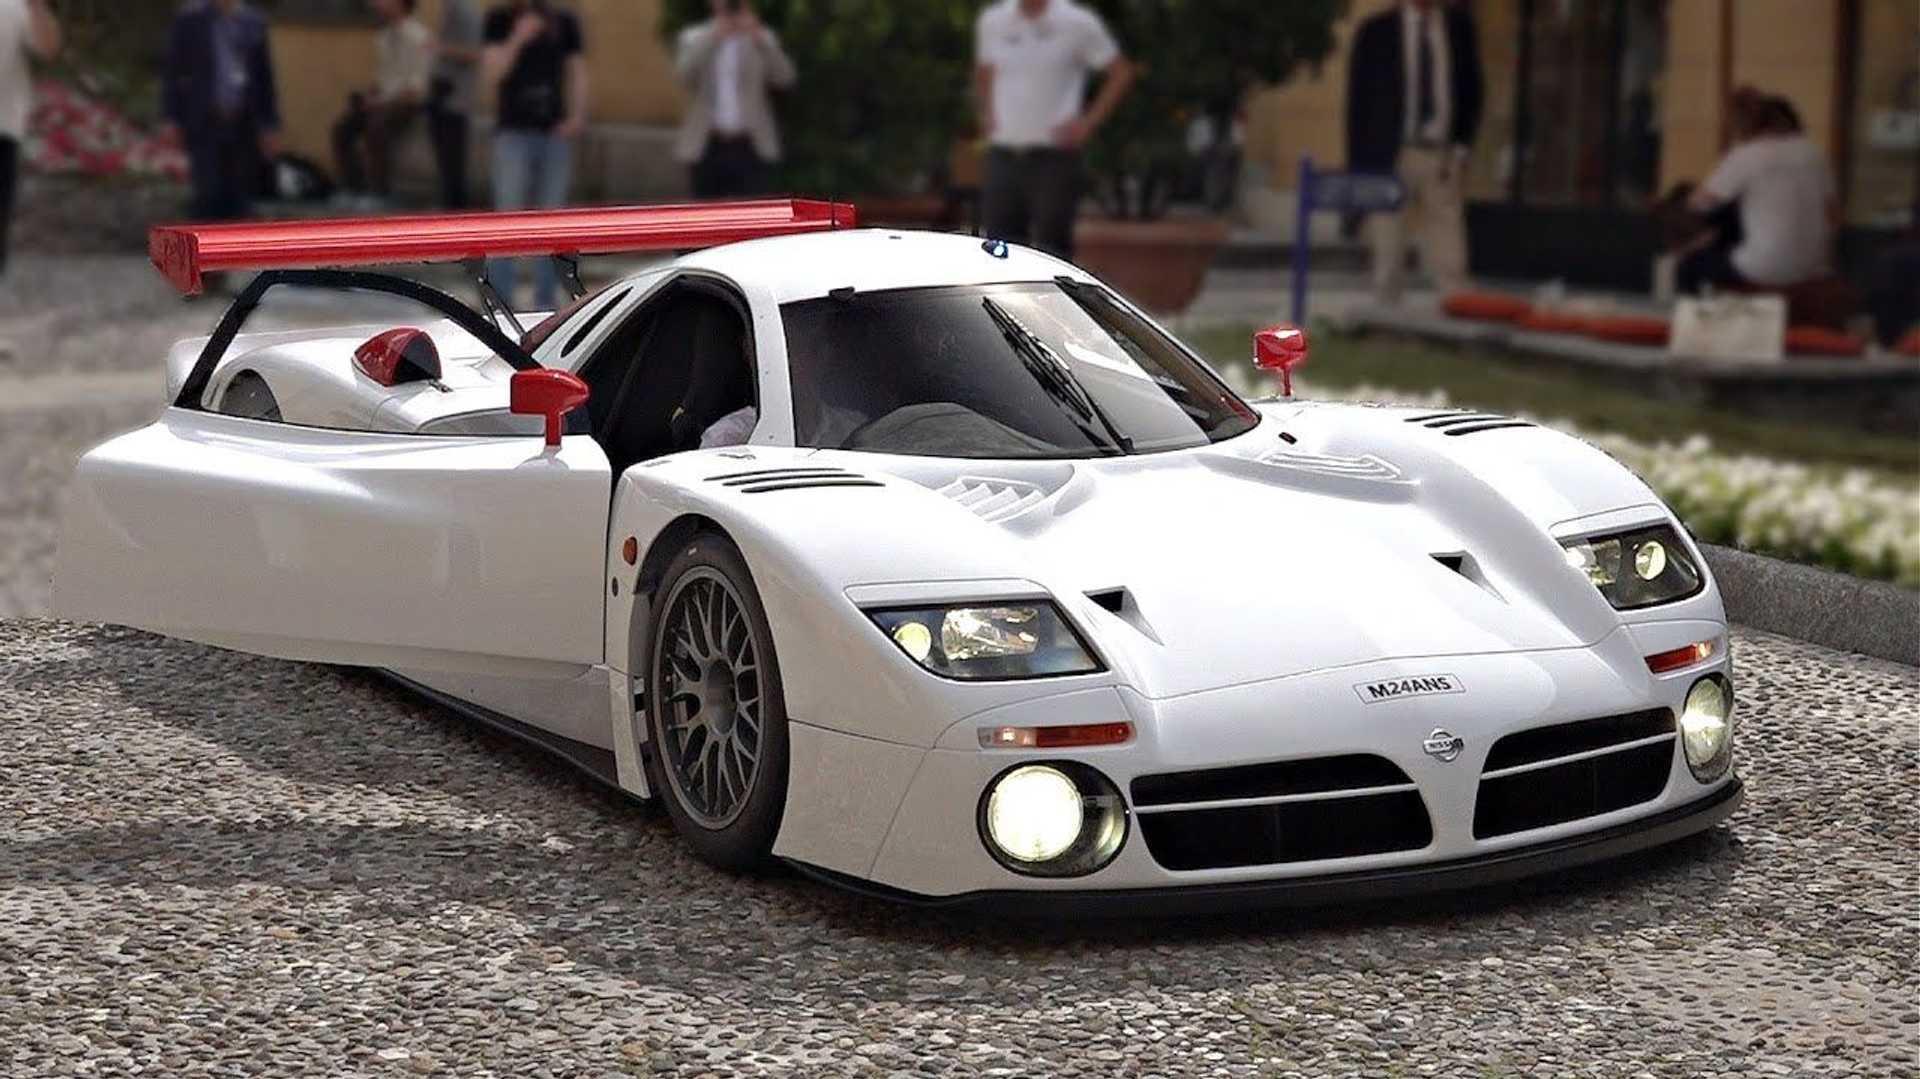 Nissan R390 Gt1 Road Car Looks As Spectacular It Sounds At